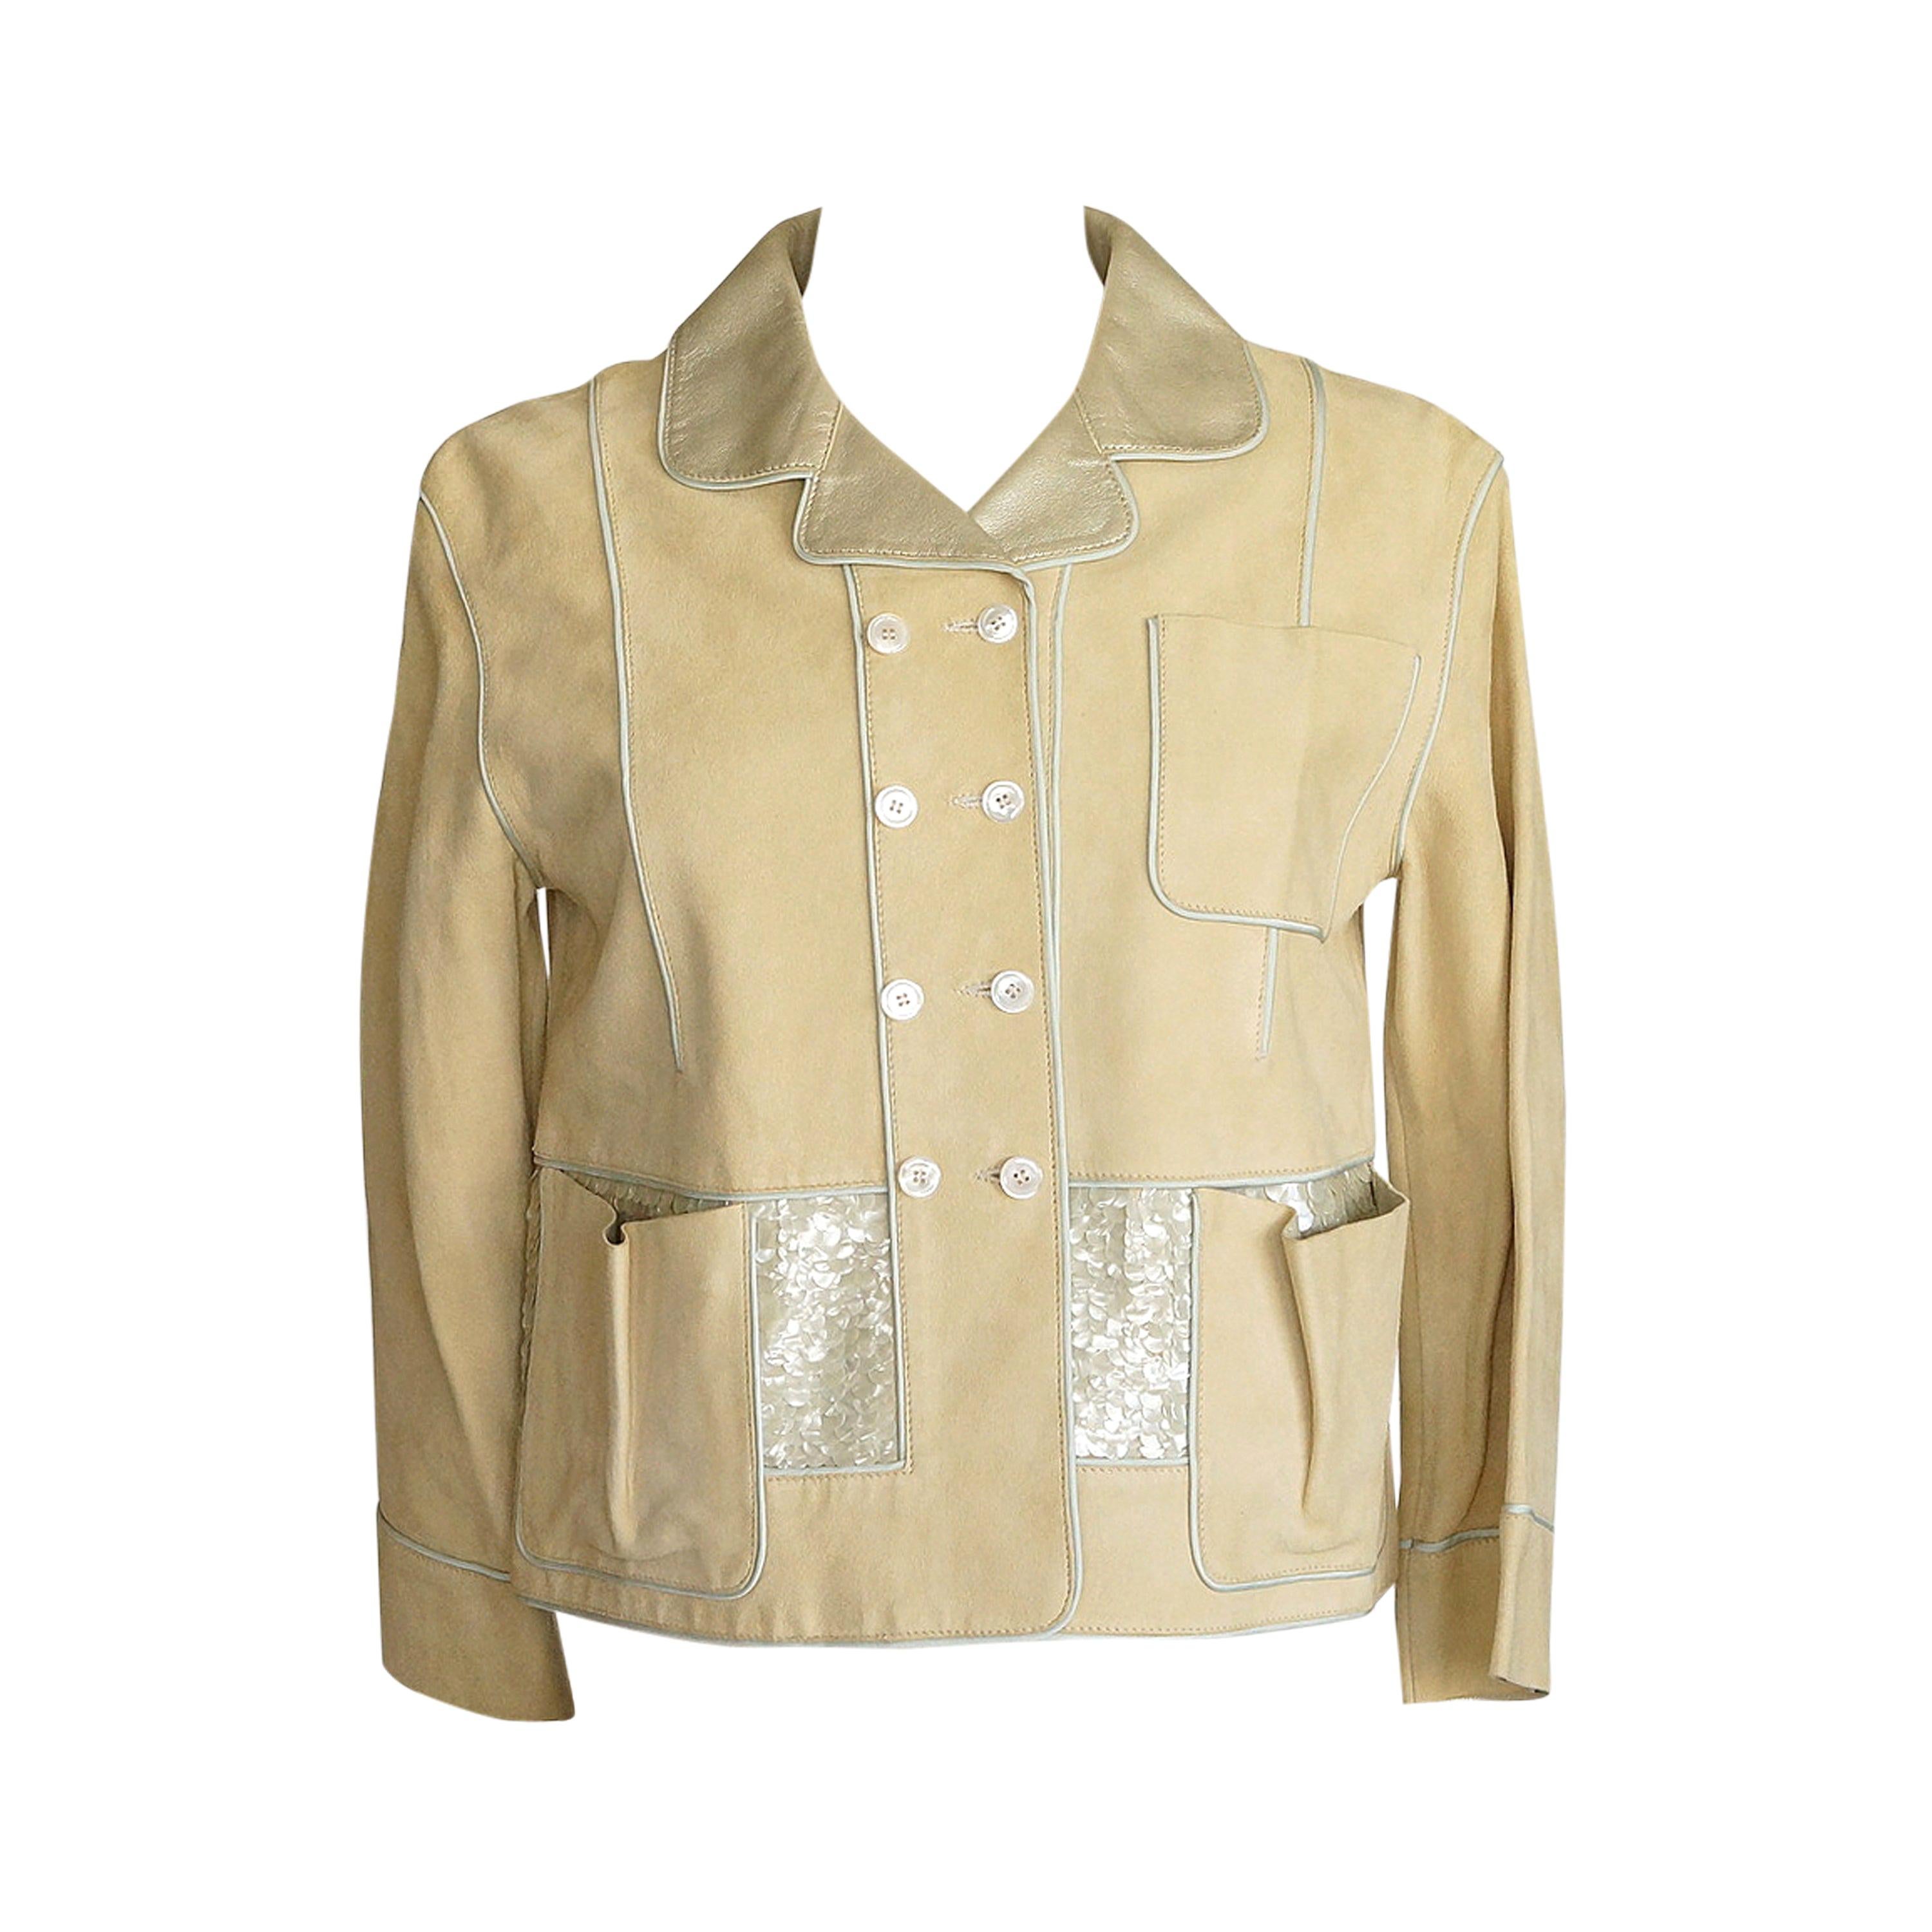 Louis Vuitton Jacket Adorned Suede Paillettes Gold Leather Collar Lining 34 /4   For Sale